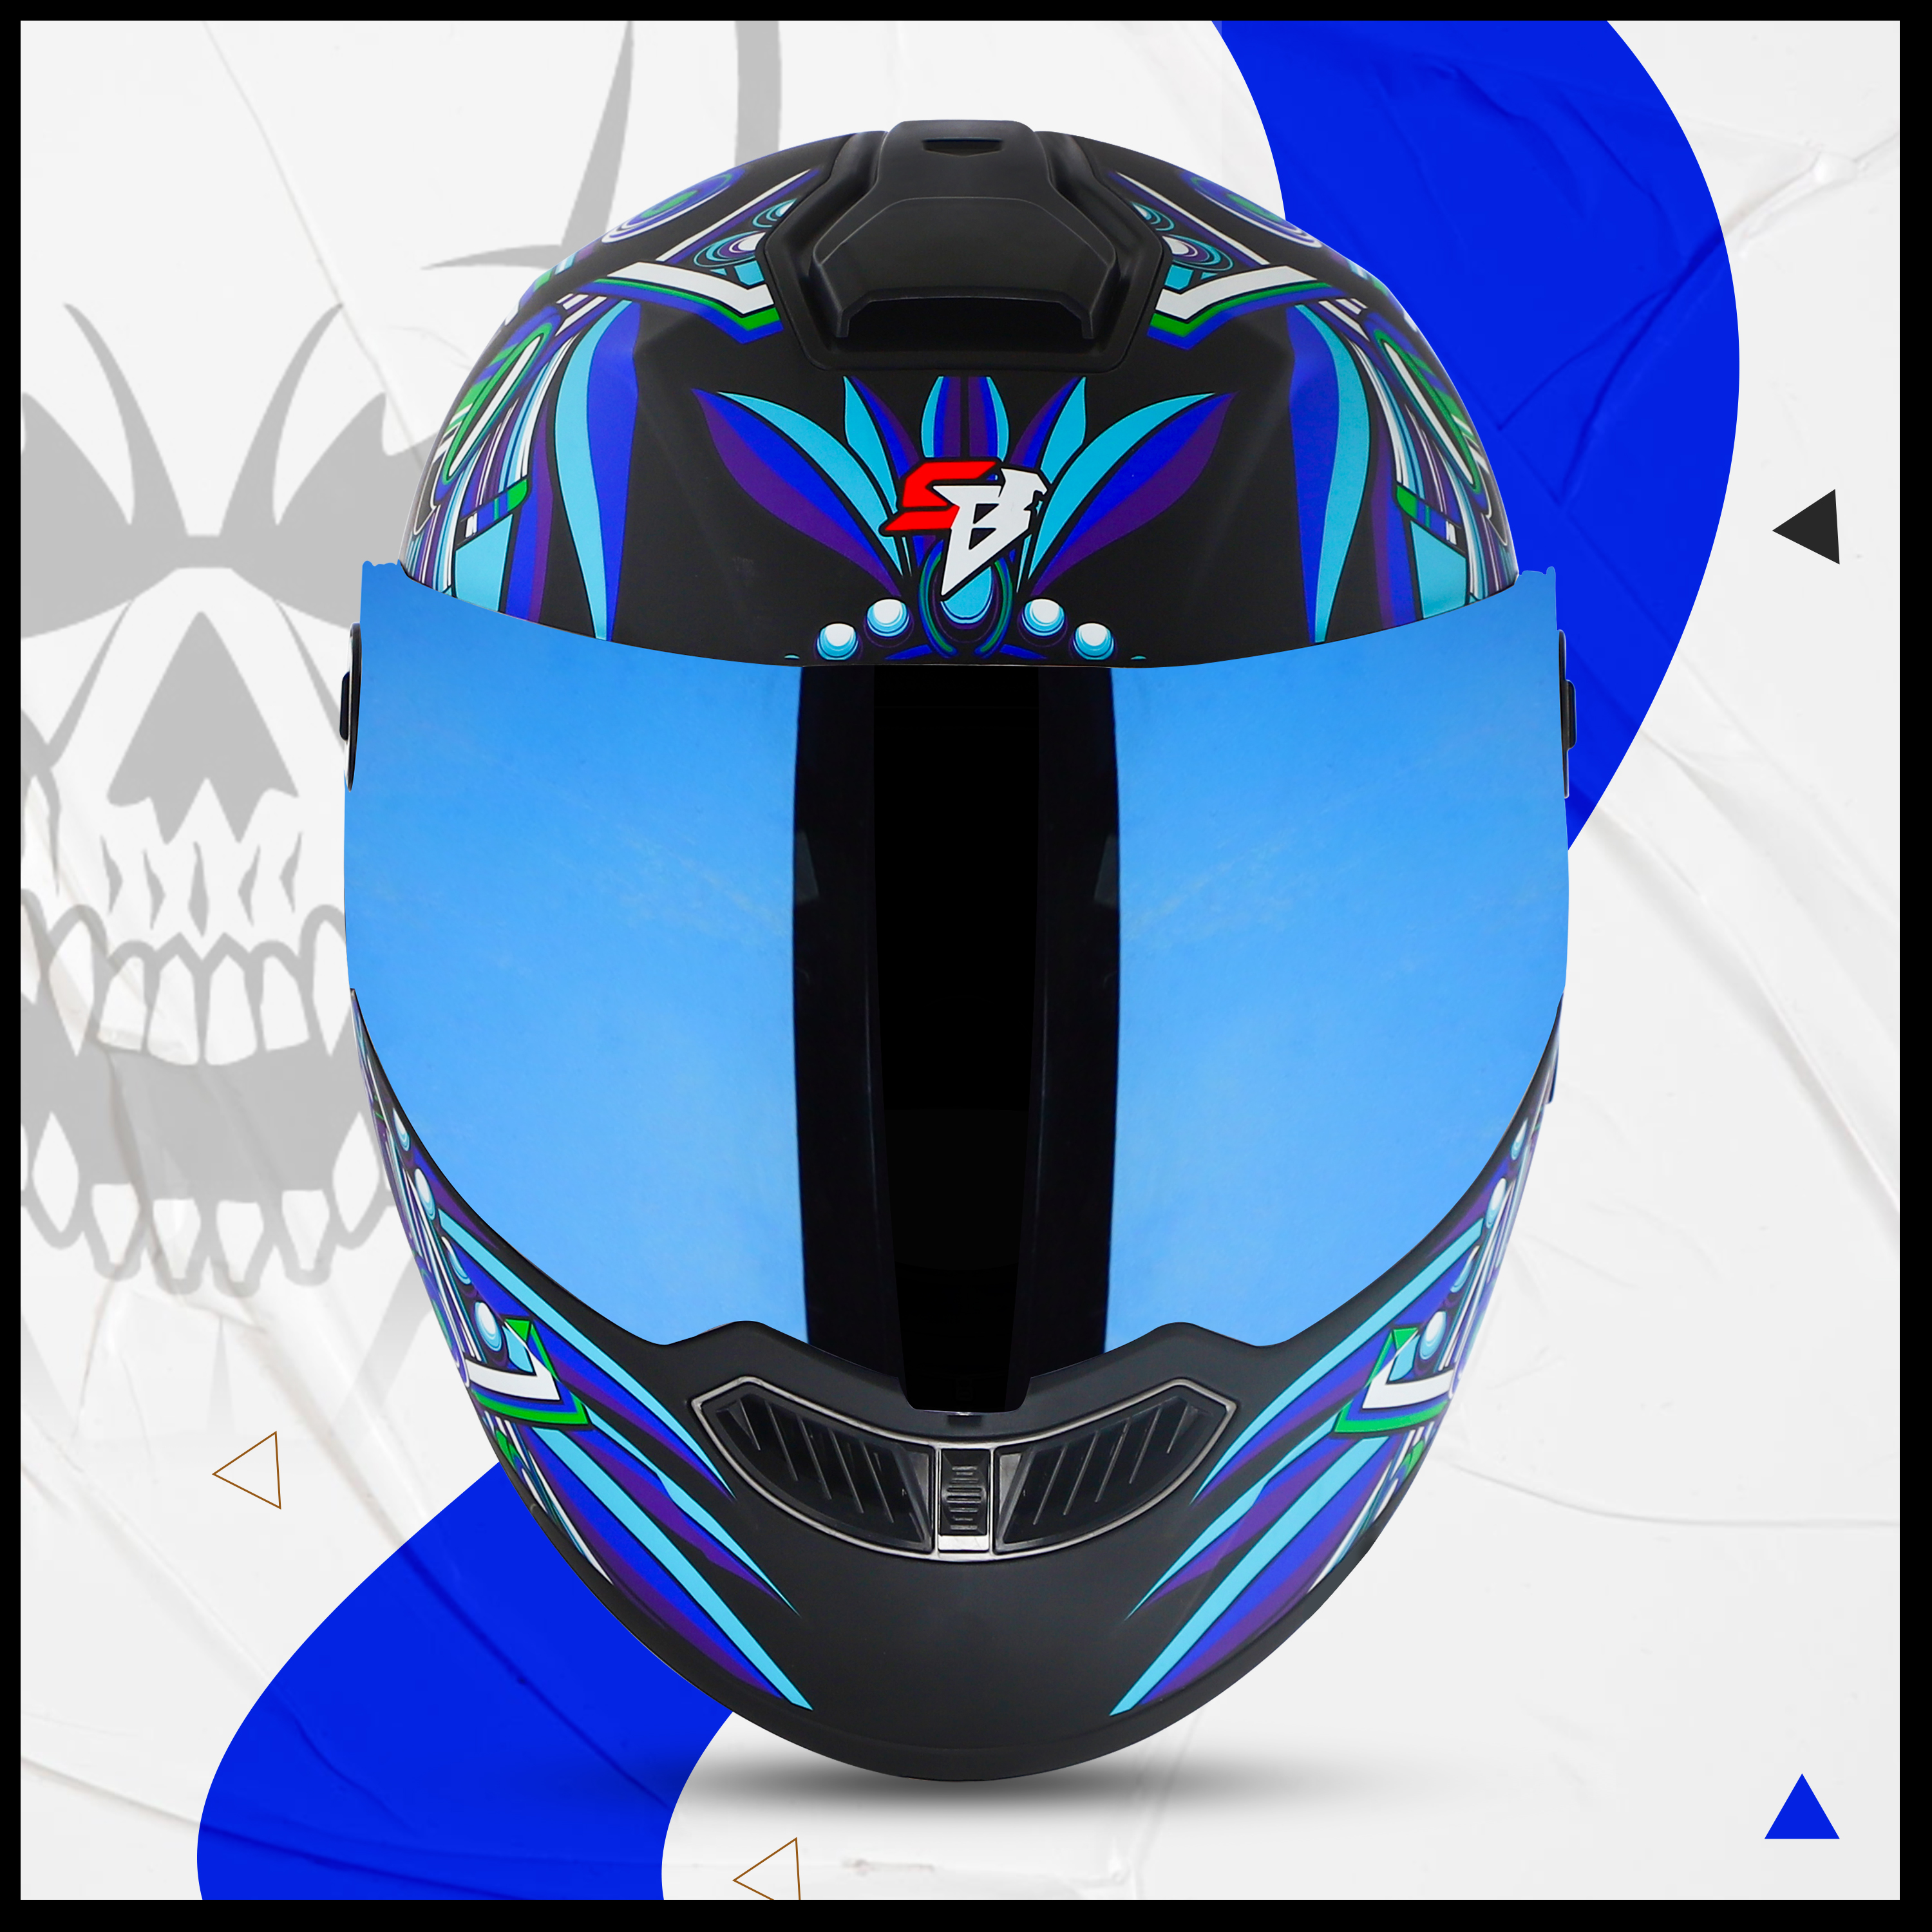 Steelbird SBA-8 Hunt ISI Certified Flip-Up Graphic Helmet For Men And Women (Glossy Black Blue With Blue Spoiler And Chrome Blue Visor)